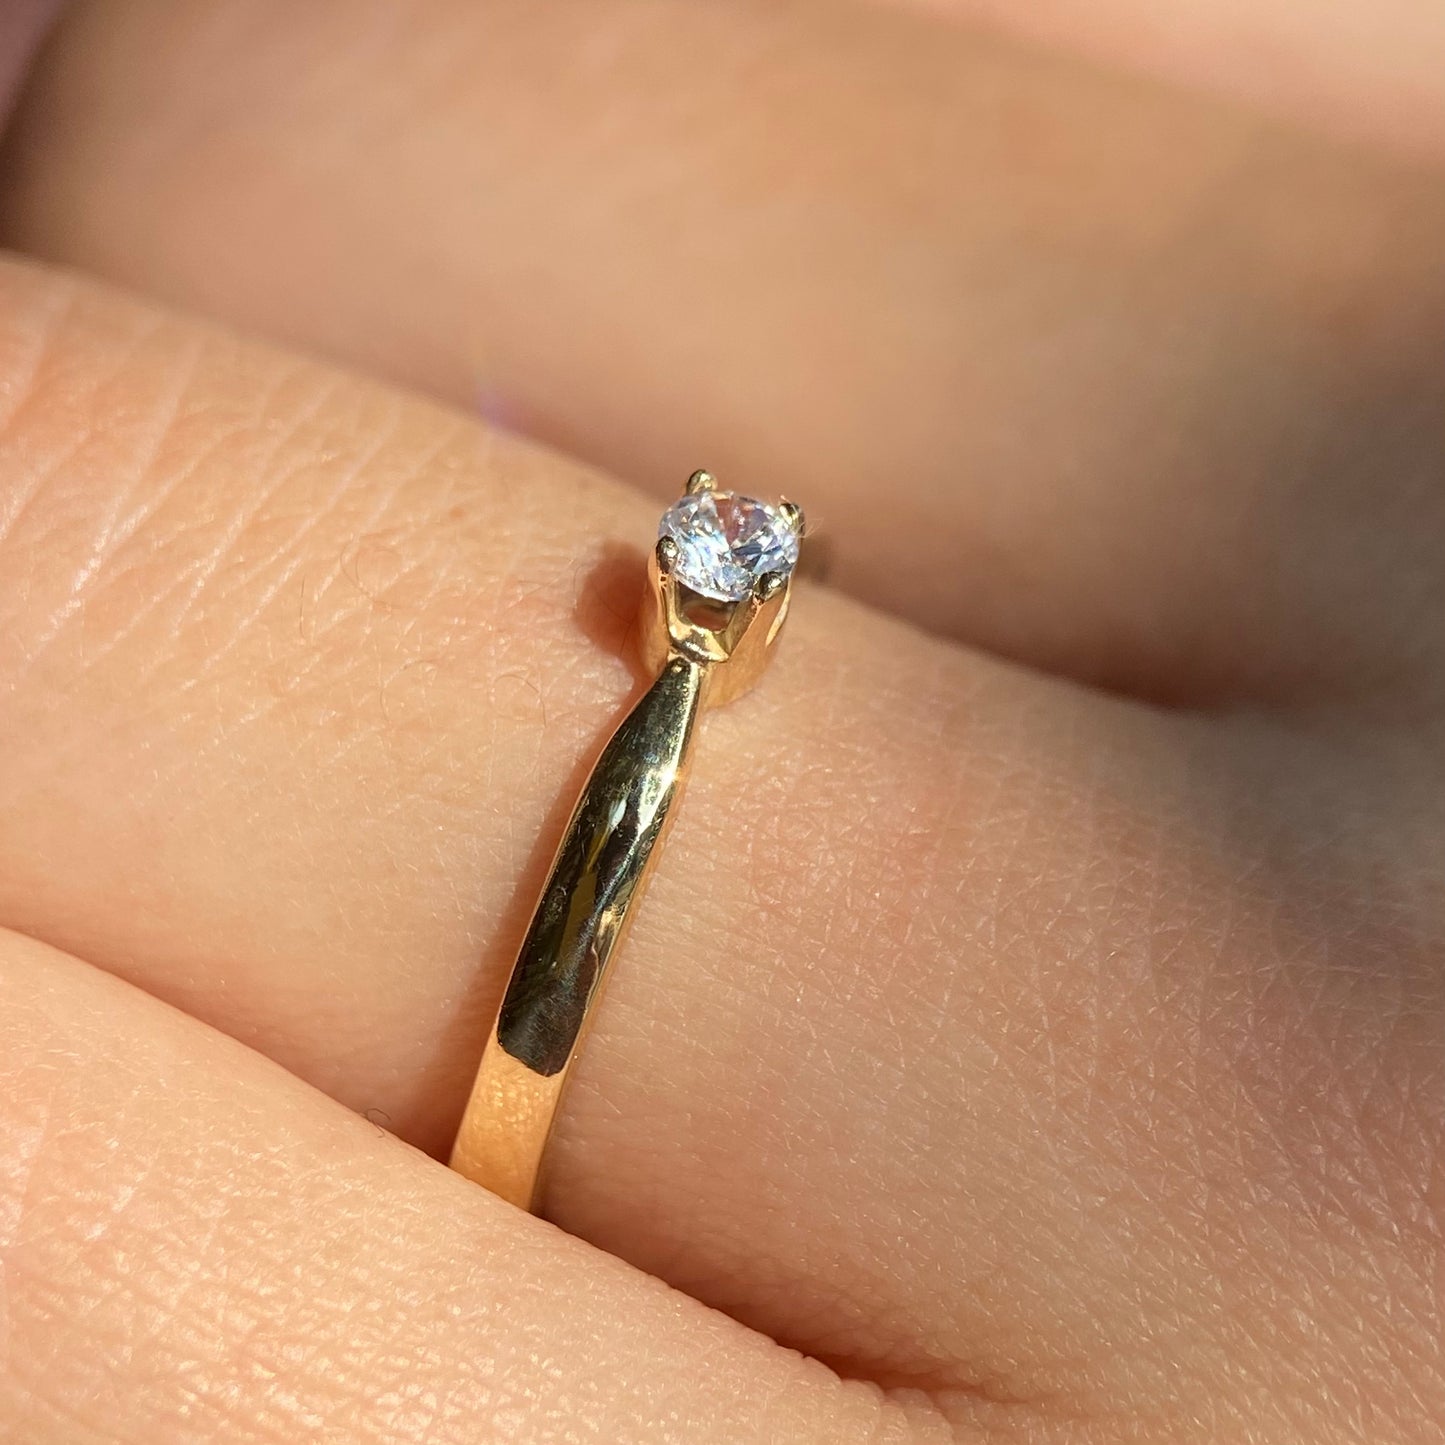 Celine ring in 18k yellow gold with zircons